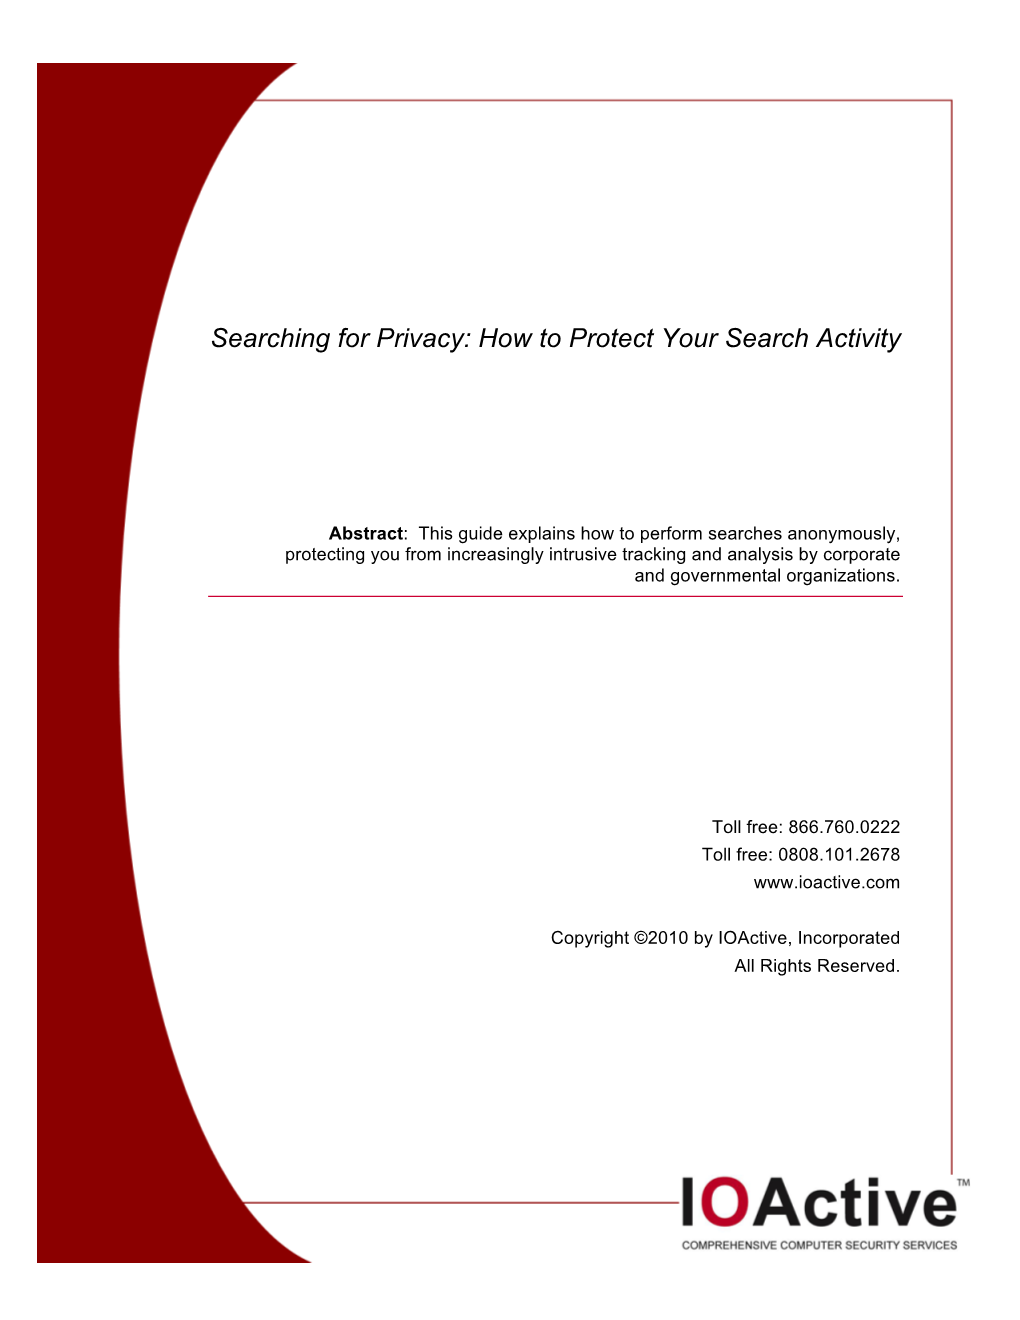 Searching for Privacy: How to Protect Your Search Activity